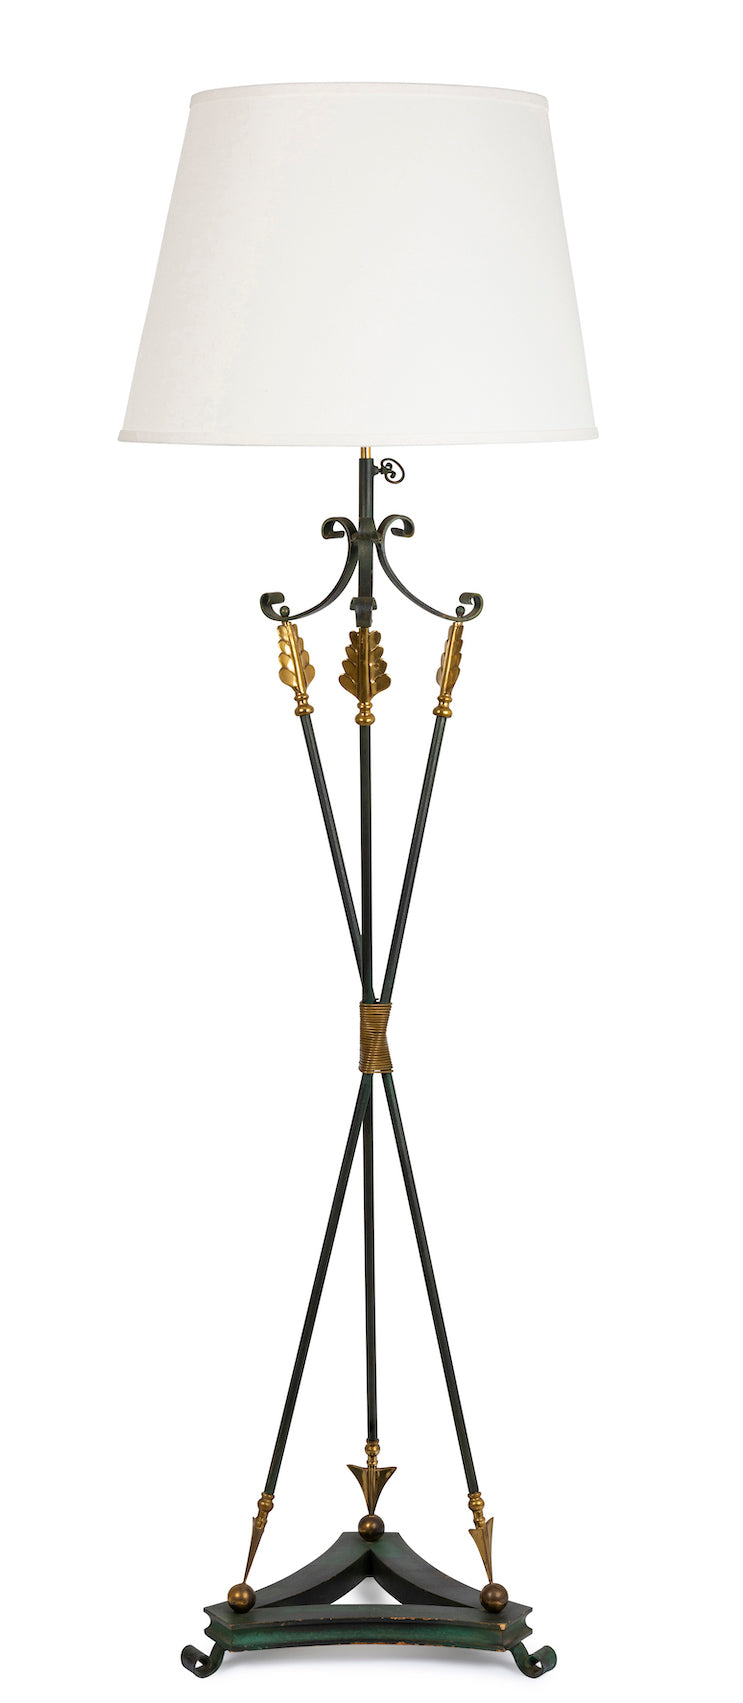 SOLD A stylish gilt metal and wrought iron arrow design floor lamp, French Circa 1950